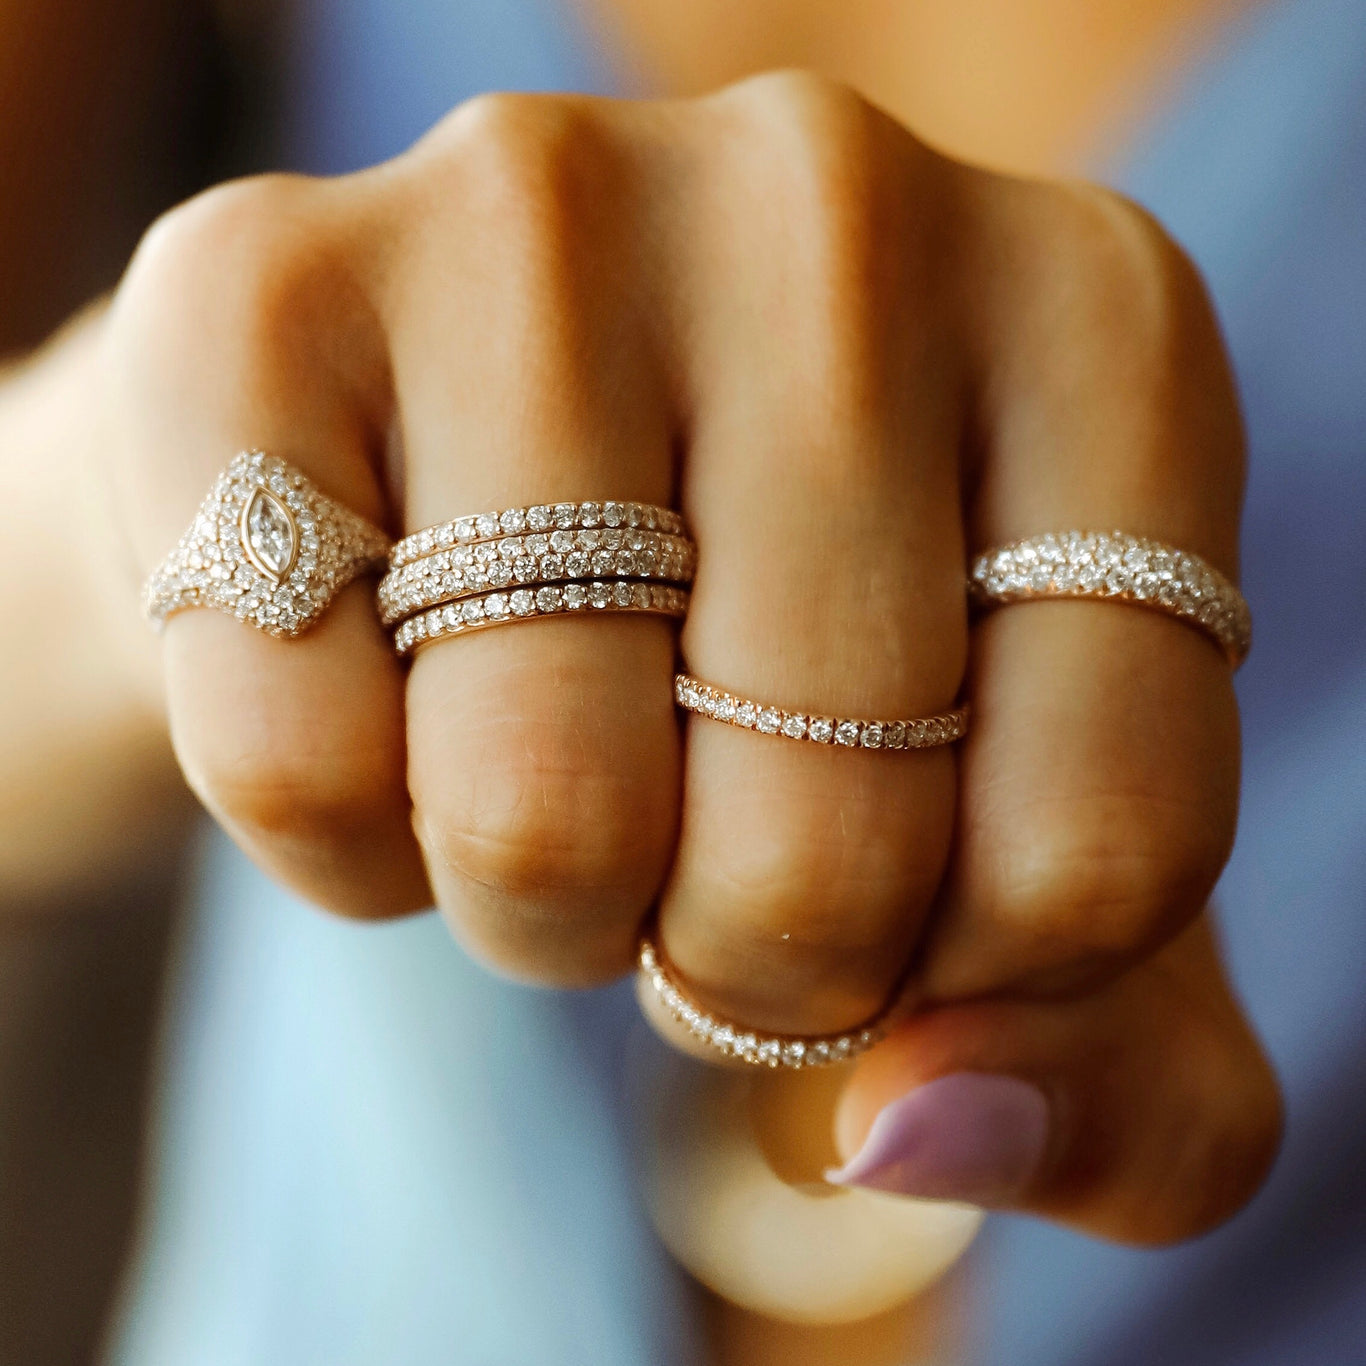 Diamond Orbit Ring shown on the ring finger next to the Marquis Pinky Ring and Olympia Ring.